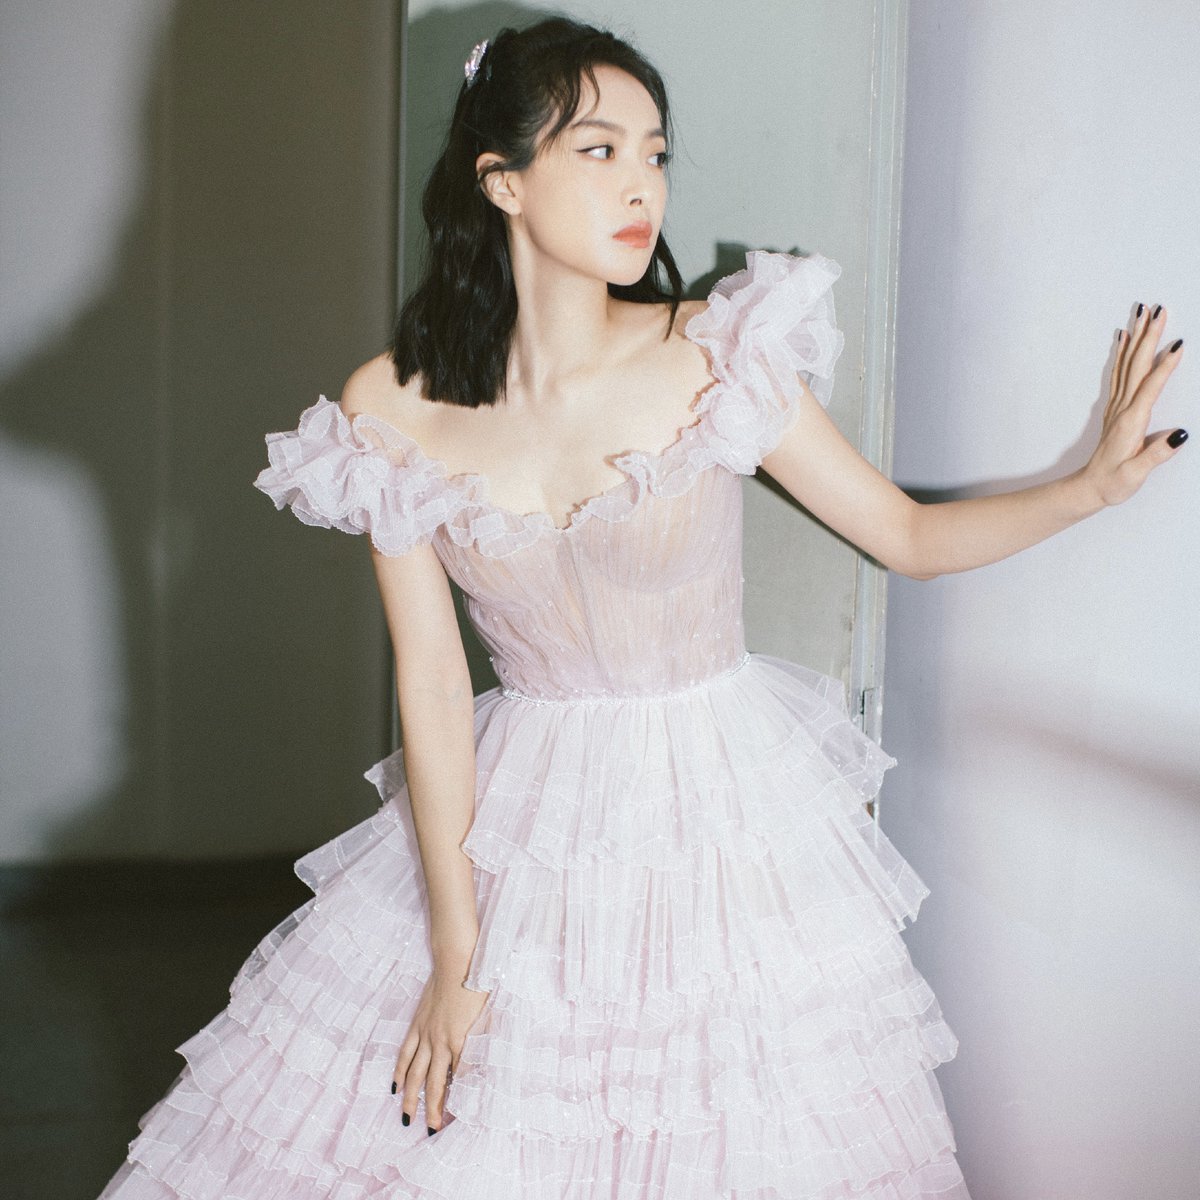 Thread of  @thesongqian Moments that compile all translations for dramas, shows, interviews, etc. + major events + stage performances for easy accessibility  #SongQian  #VictoriaSong